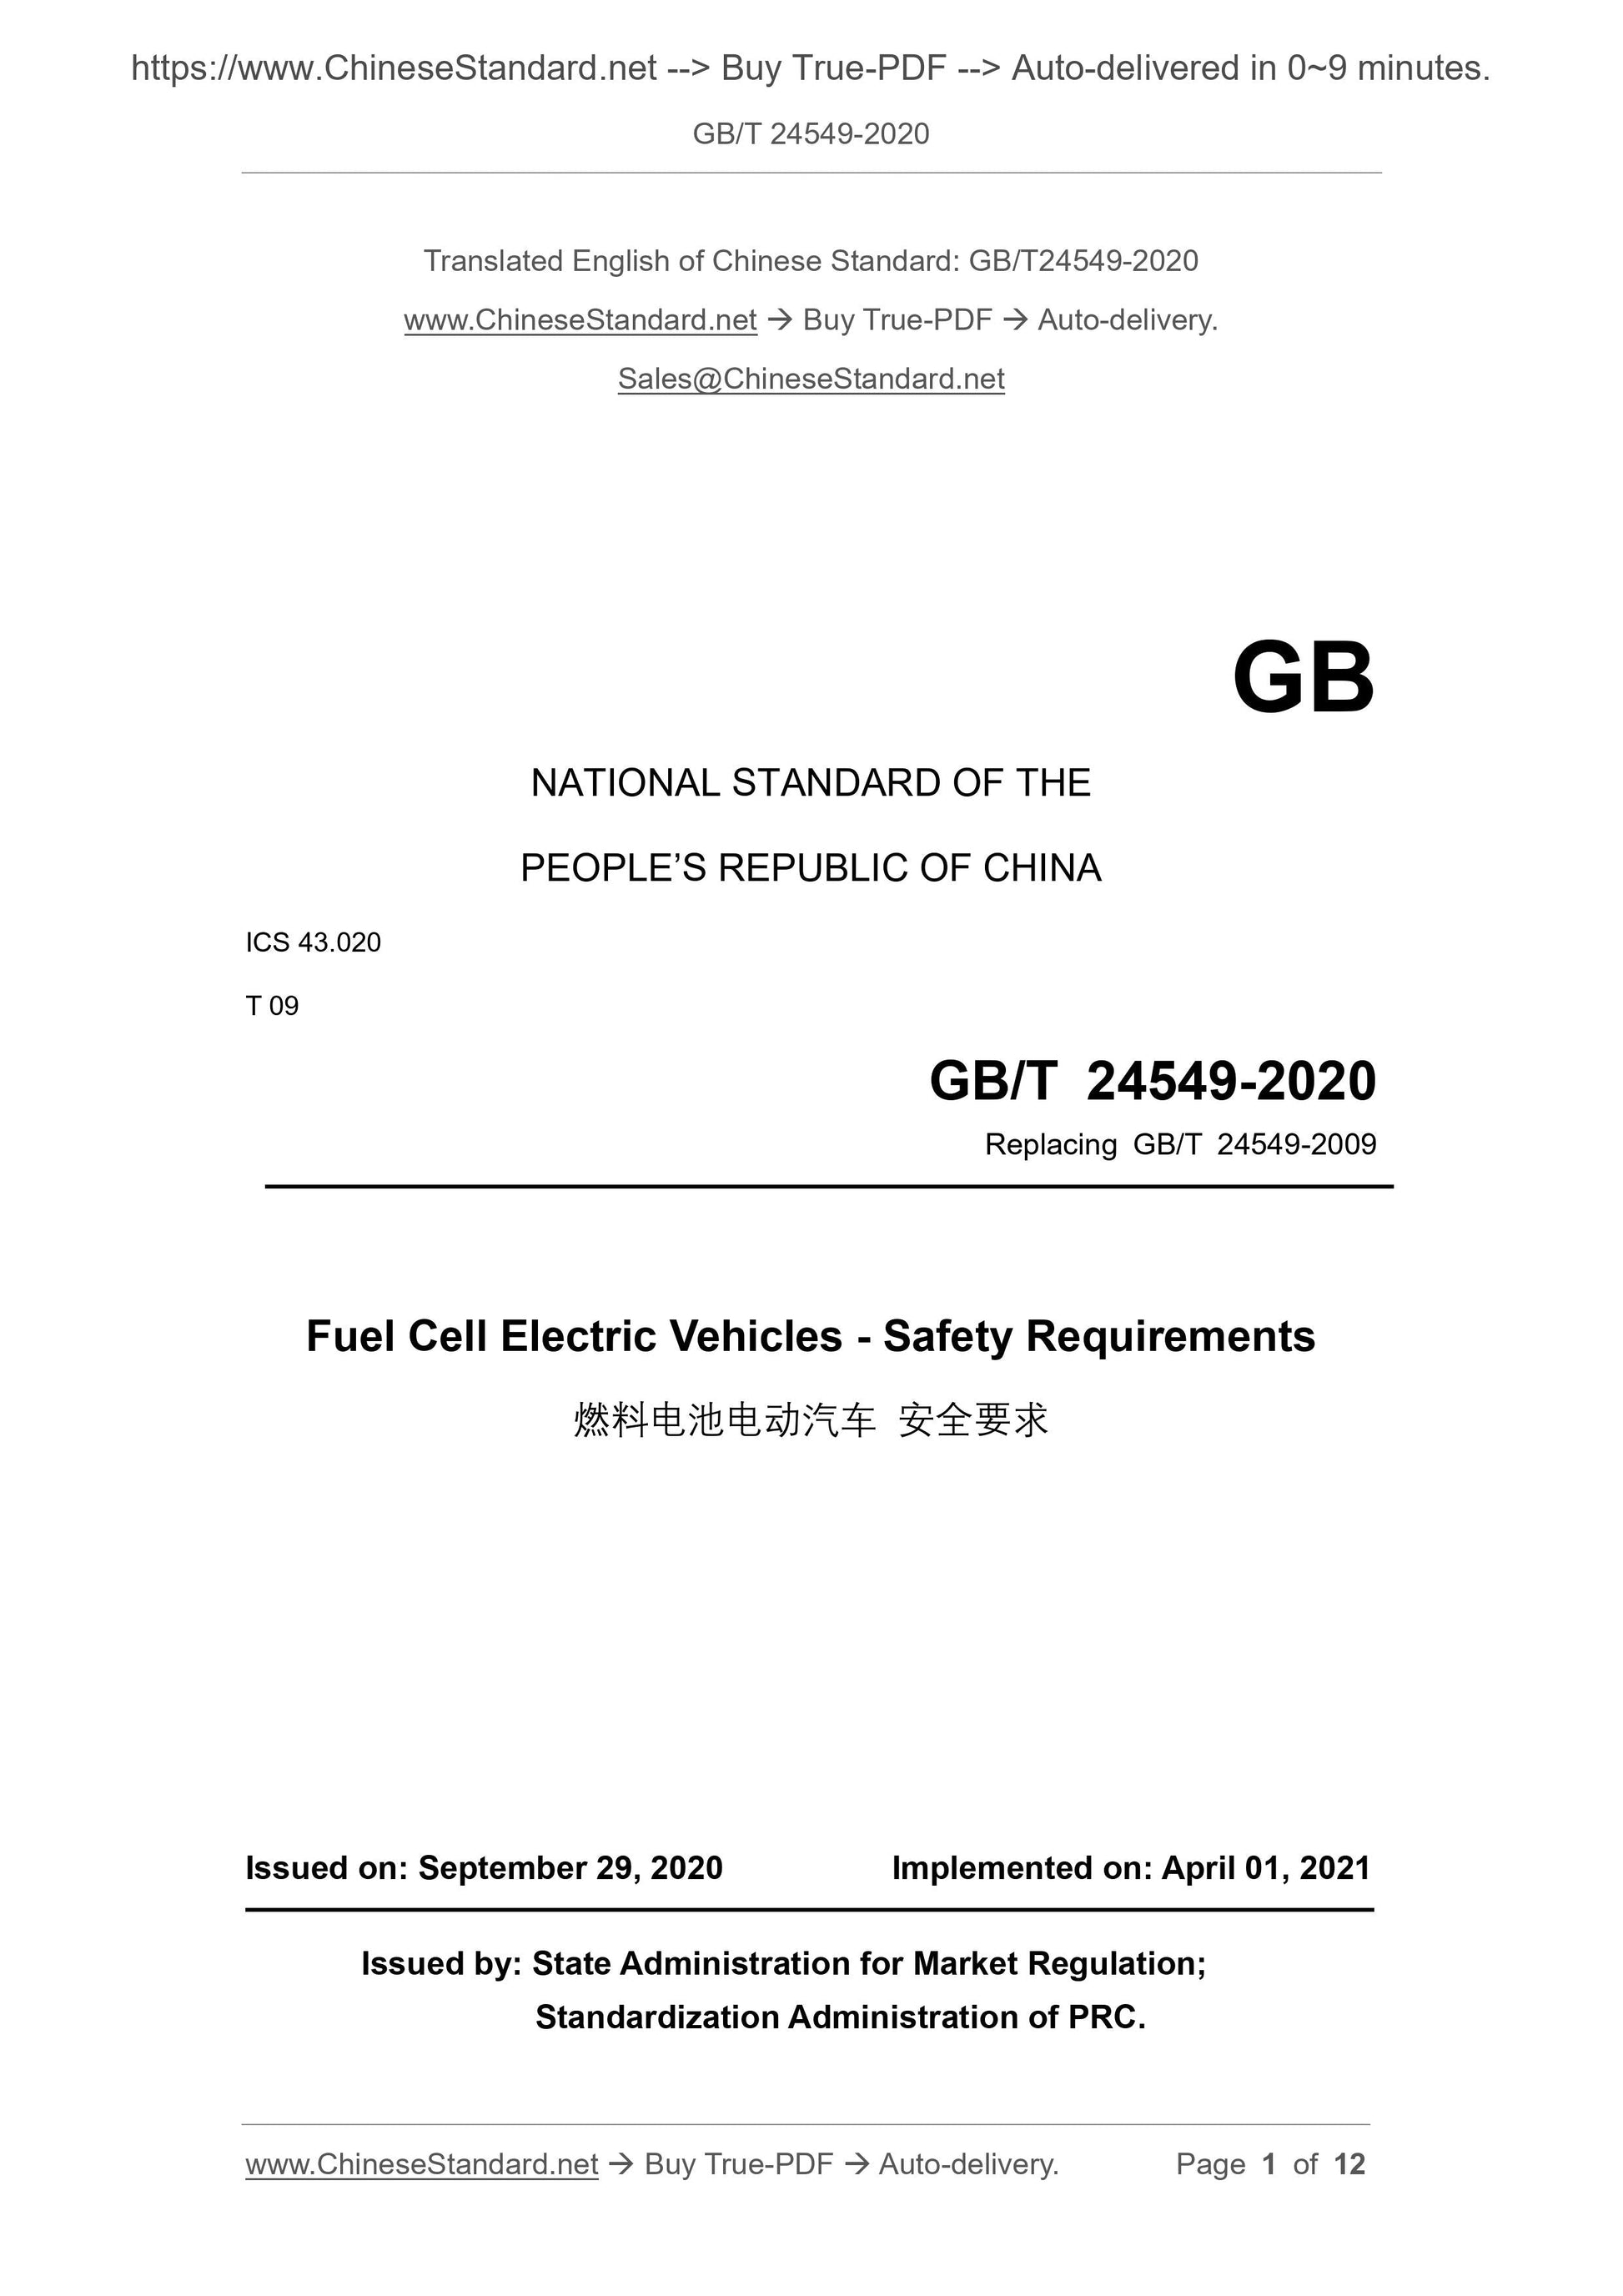 GB/T 24549-2020 Page 1